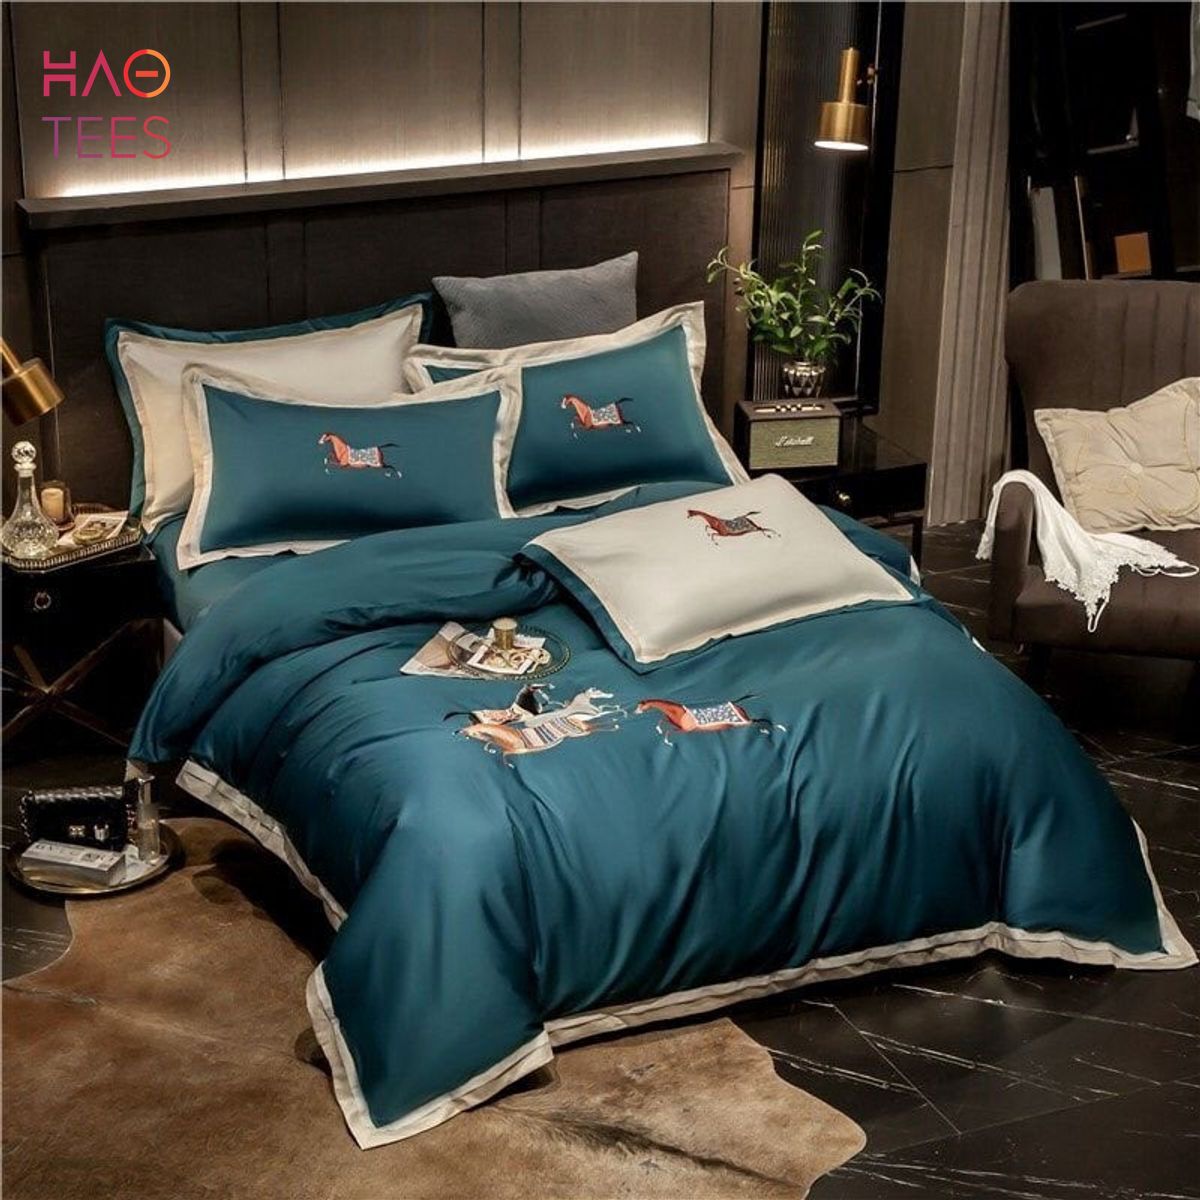 THE BEST Horse Luxury Brand Inspired 3D Personalized Customized Bedding Sets All Over Printed